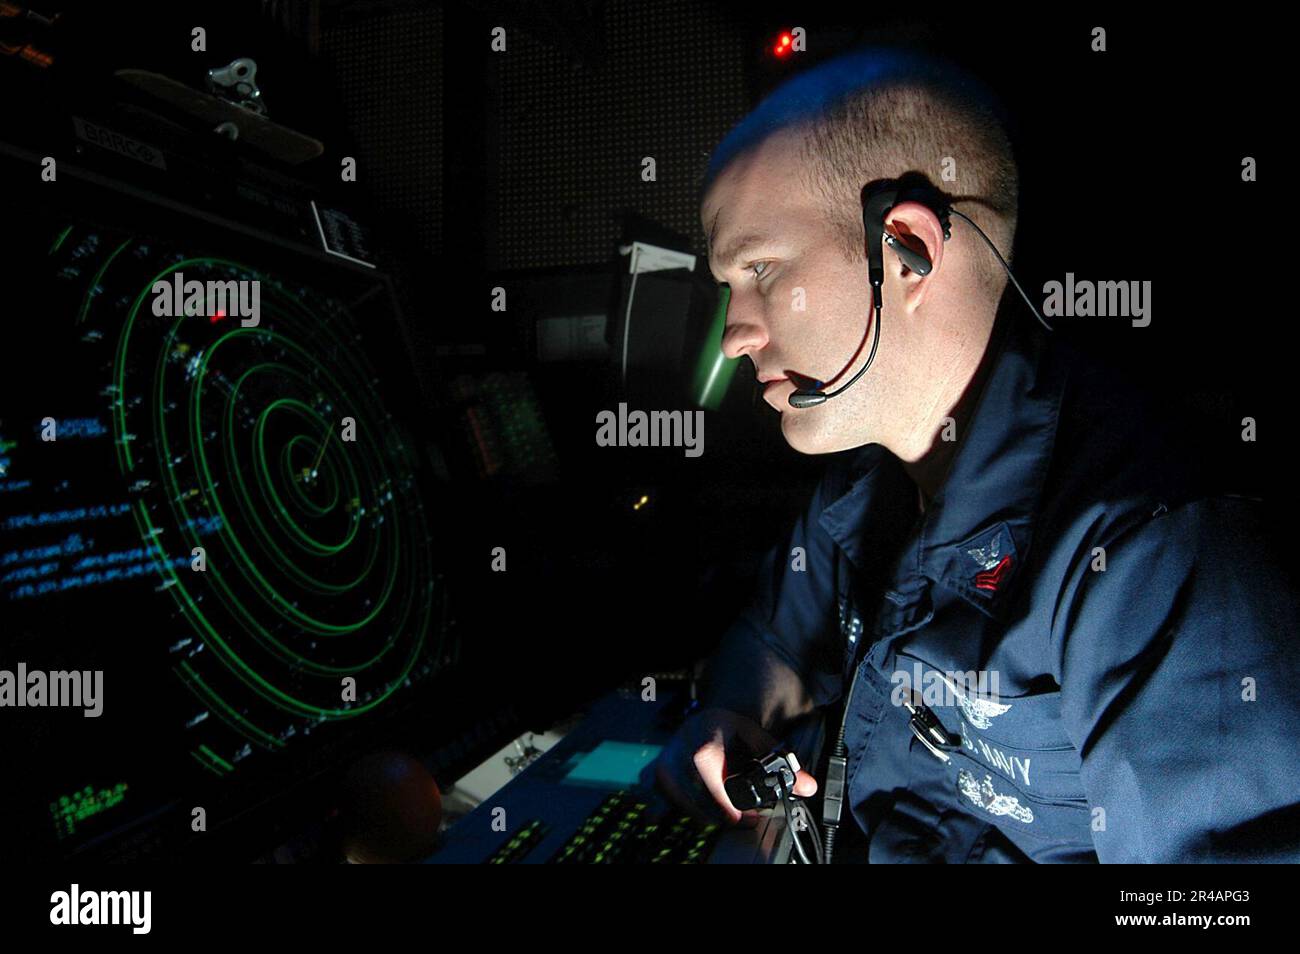 US Navy Air Traffic Controller 1st class monitors flight operations and tracks aircraft from the Carrier Air Traffic Control Center (CATCC) aboard the Nimitz-class aircraft carrier USS Carl Vins Stock Photo